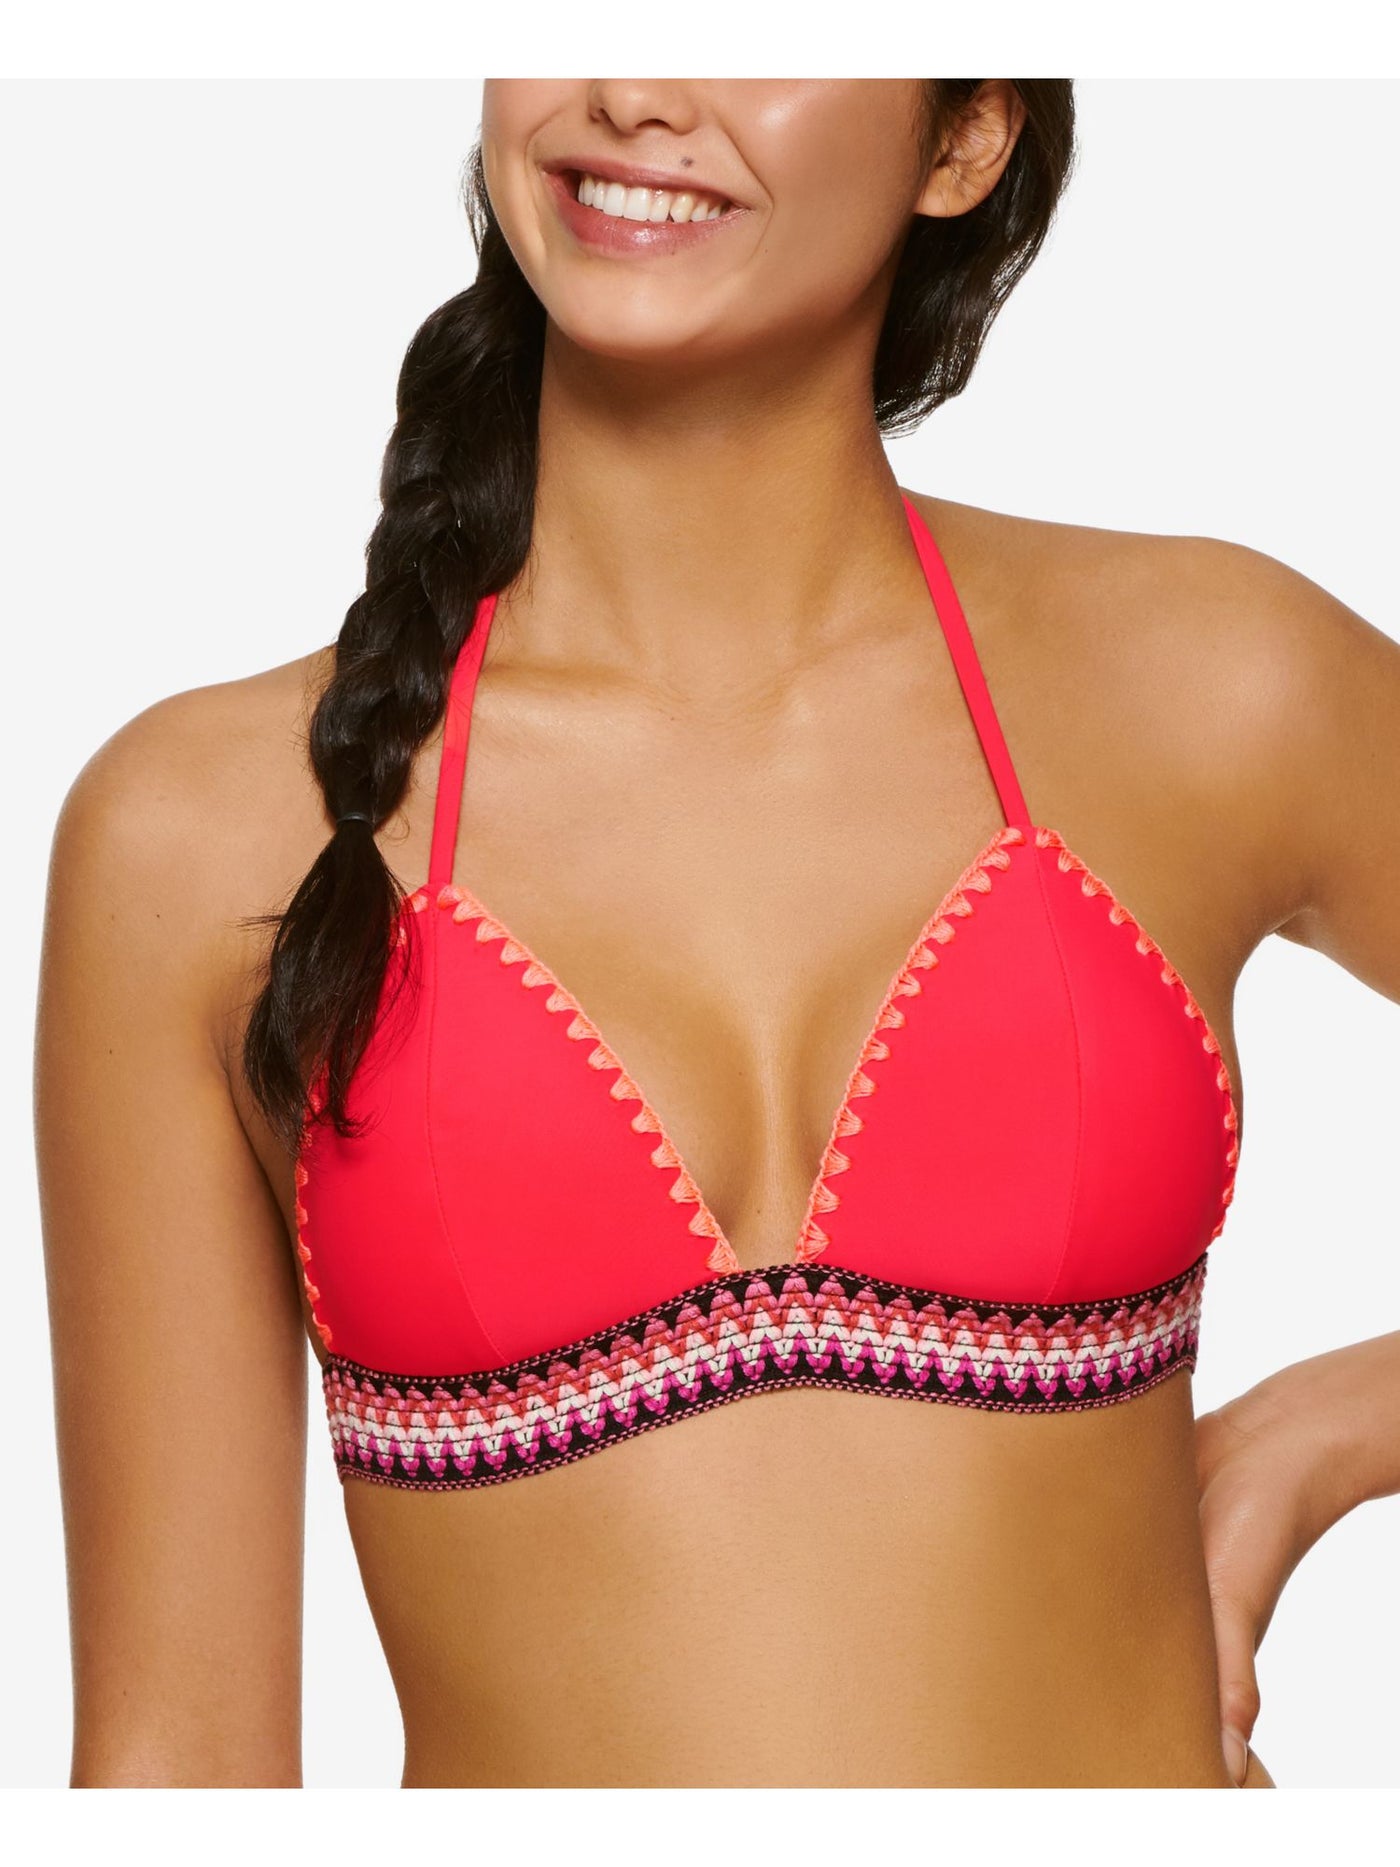 HULA HONEY Women's Coral Push-Up Hook and Eye Closure Tie Zinc Triangle Swimsuit Top XS